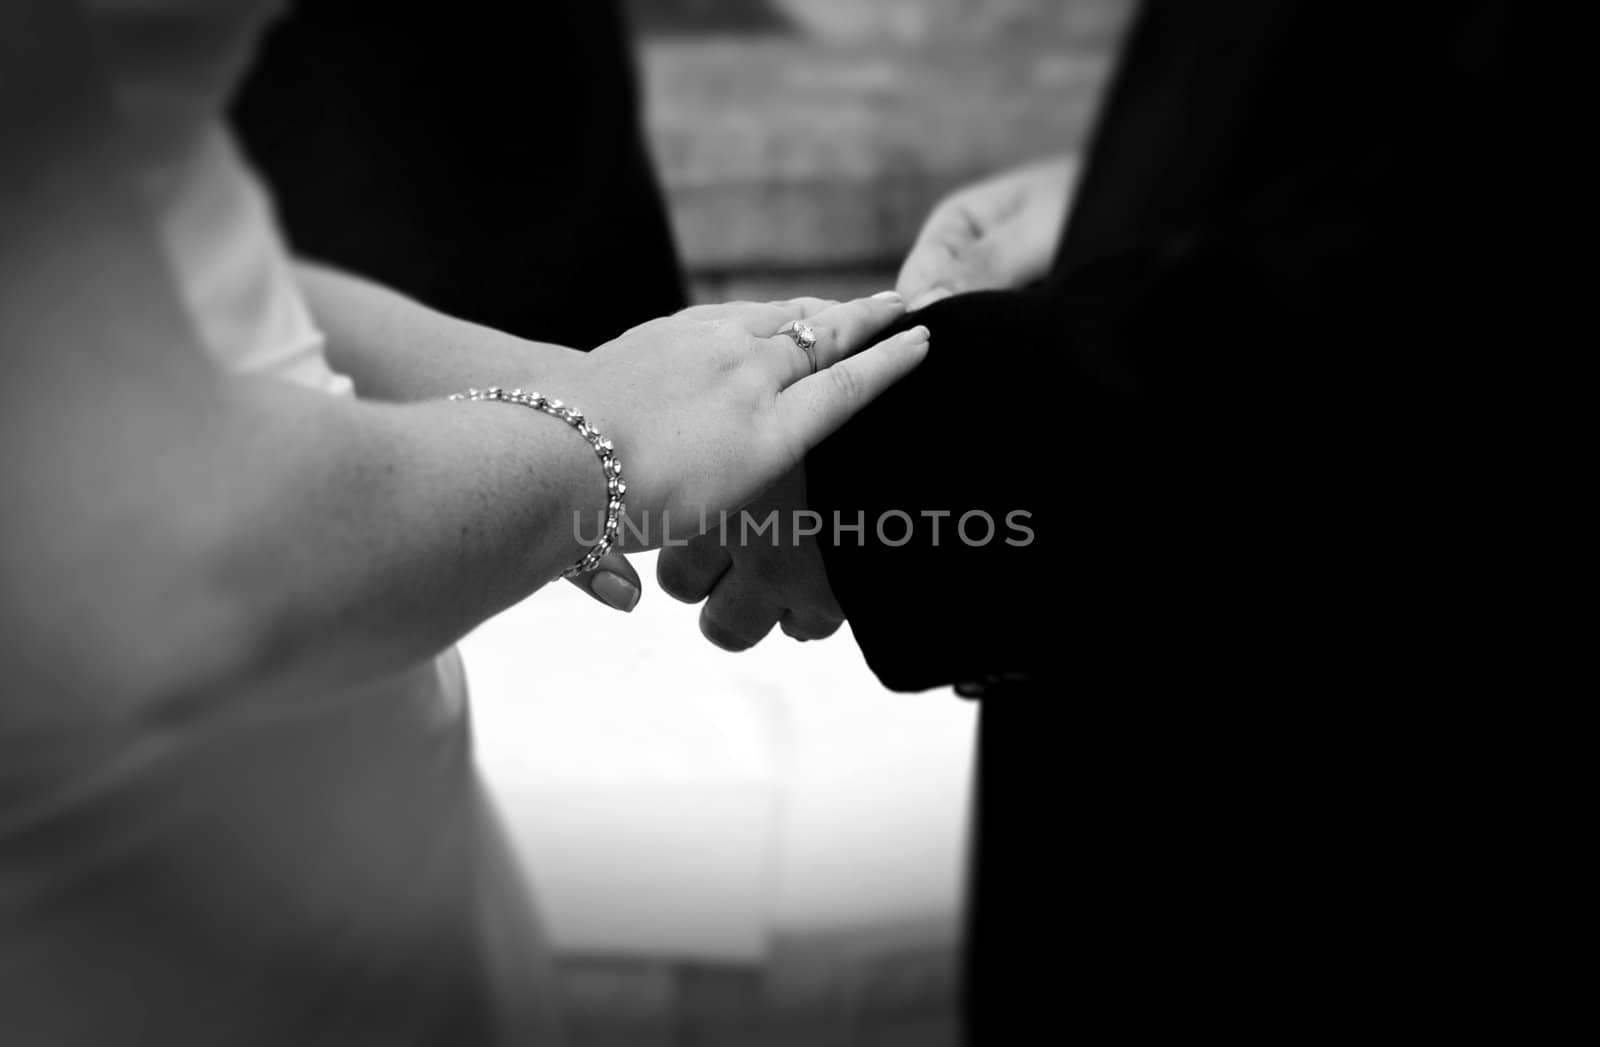 Detail of bride and groom's hands showing wedding bands